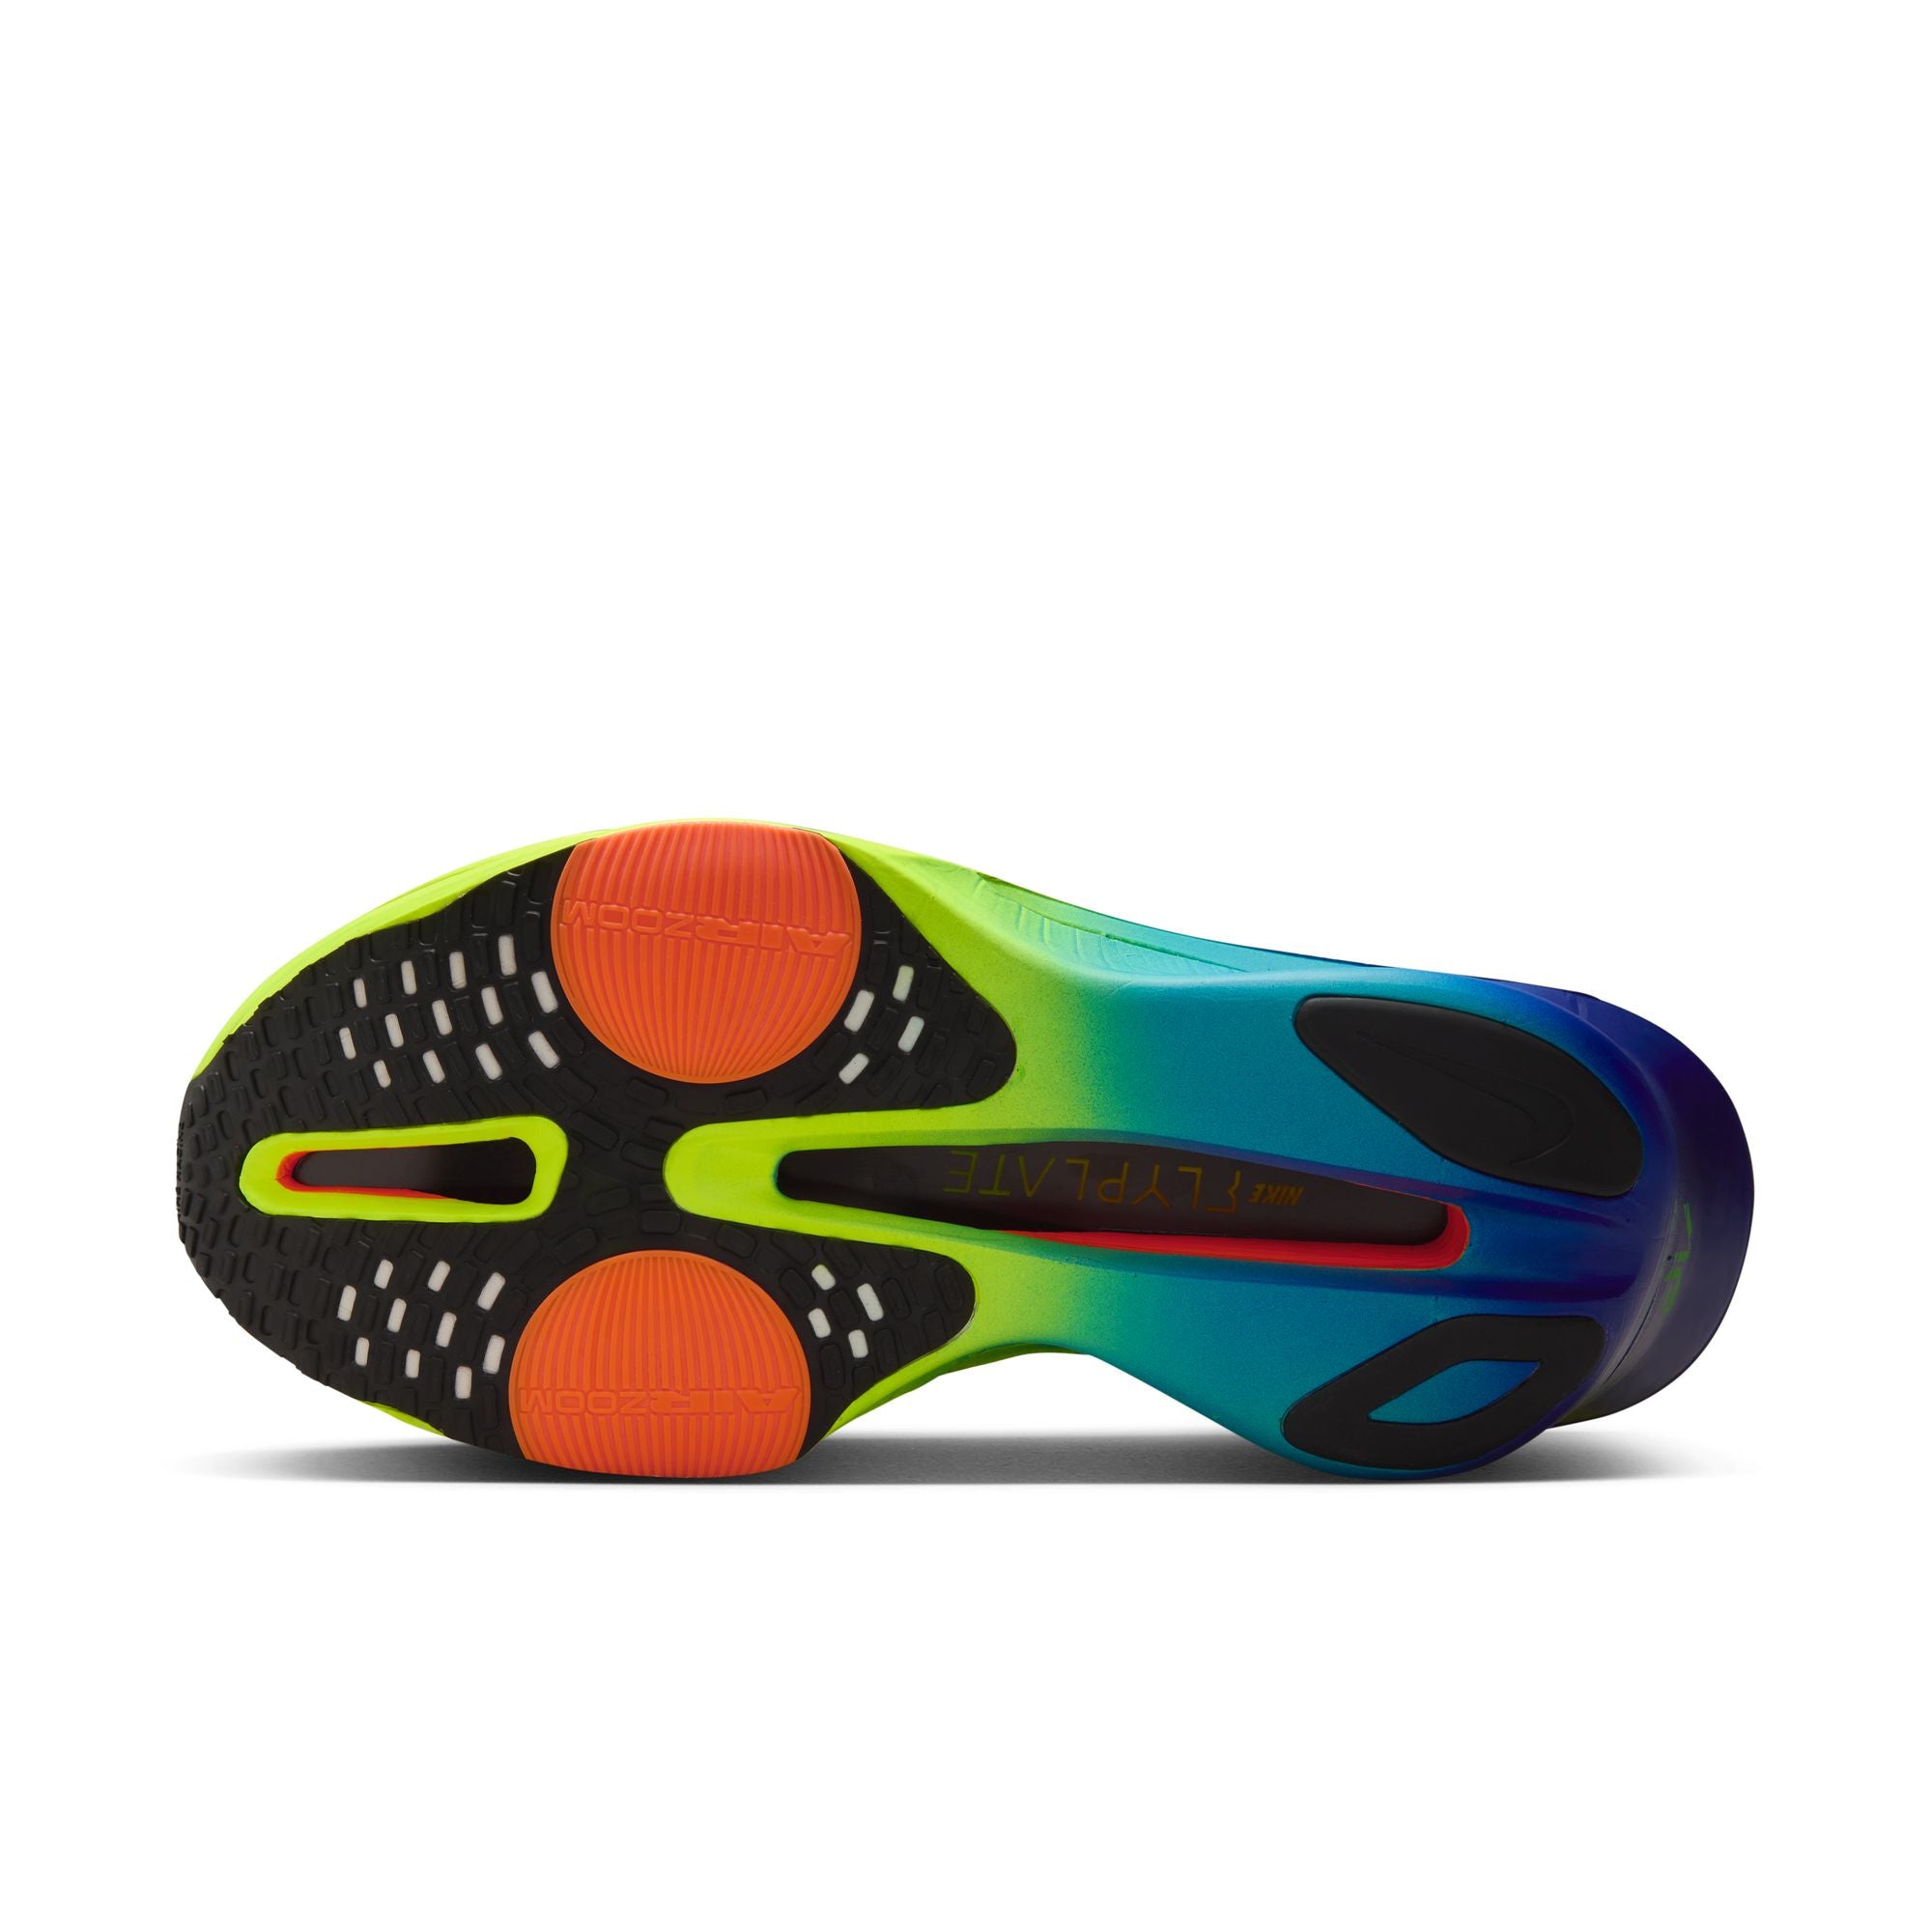 A full-length carbon fiber plate delivers a propulsive sensation that helps you smoothly transition through every stride and tackle turns with confidence.